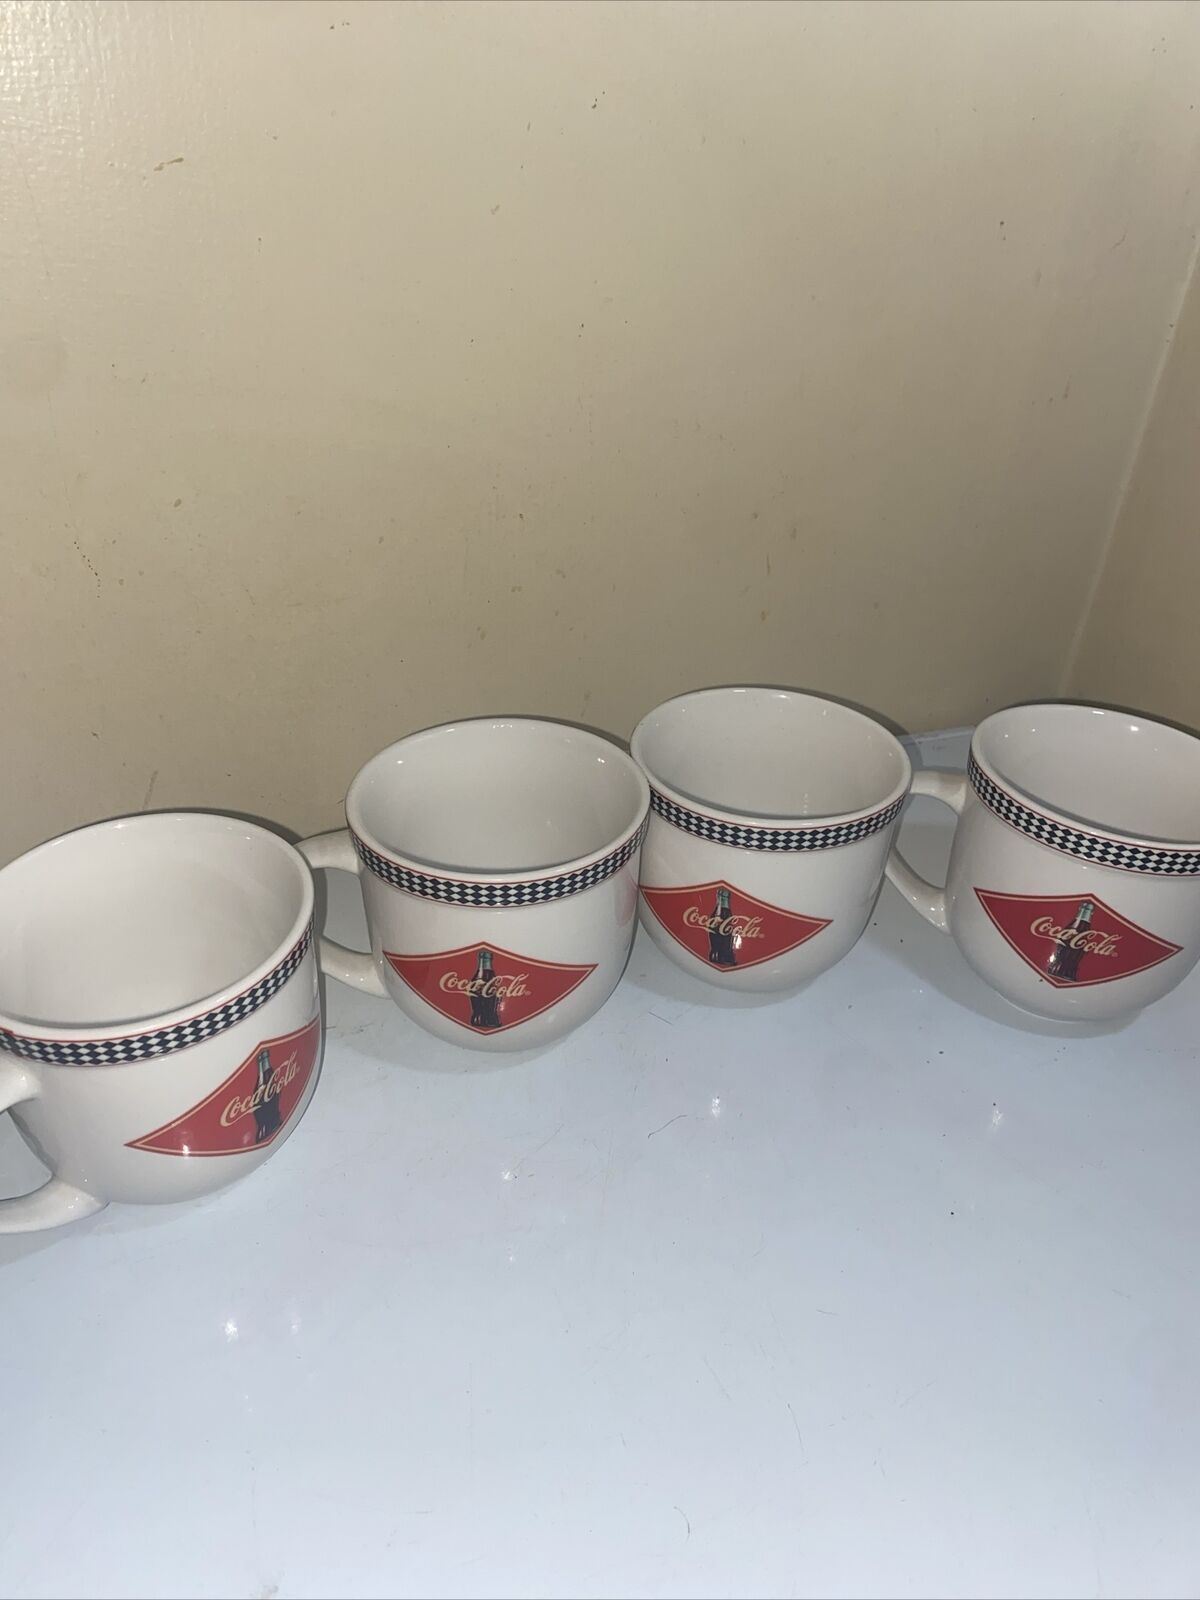 Lot of 4 Coca-Cola Coffee Mugs Retro Café Style Drinking Cups Gibson 2003